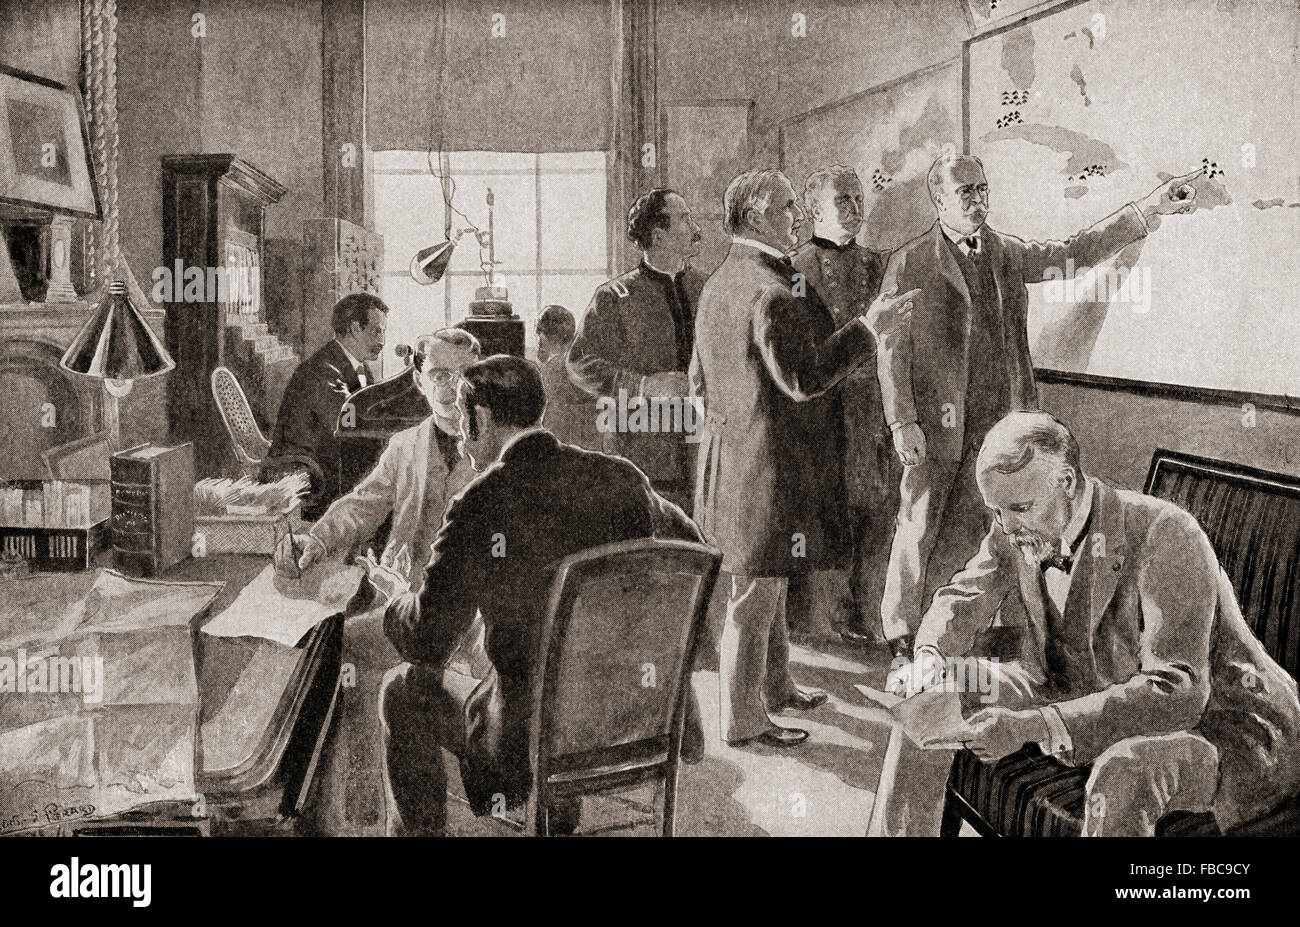 The war room at Washington D.C., United States of America around the time of the Spanish-American War, 1898. Stock Photo